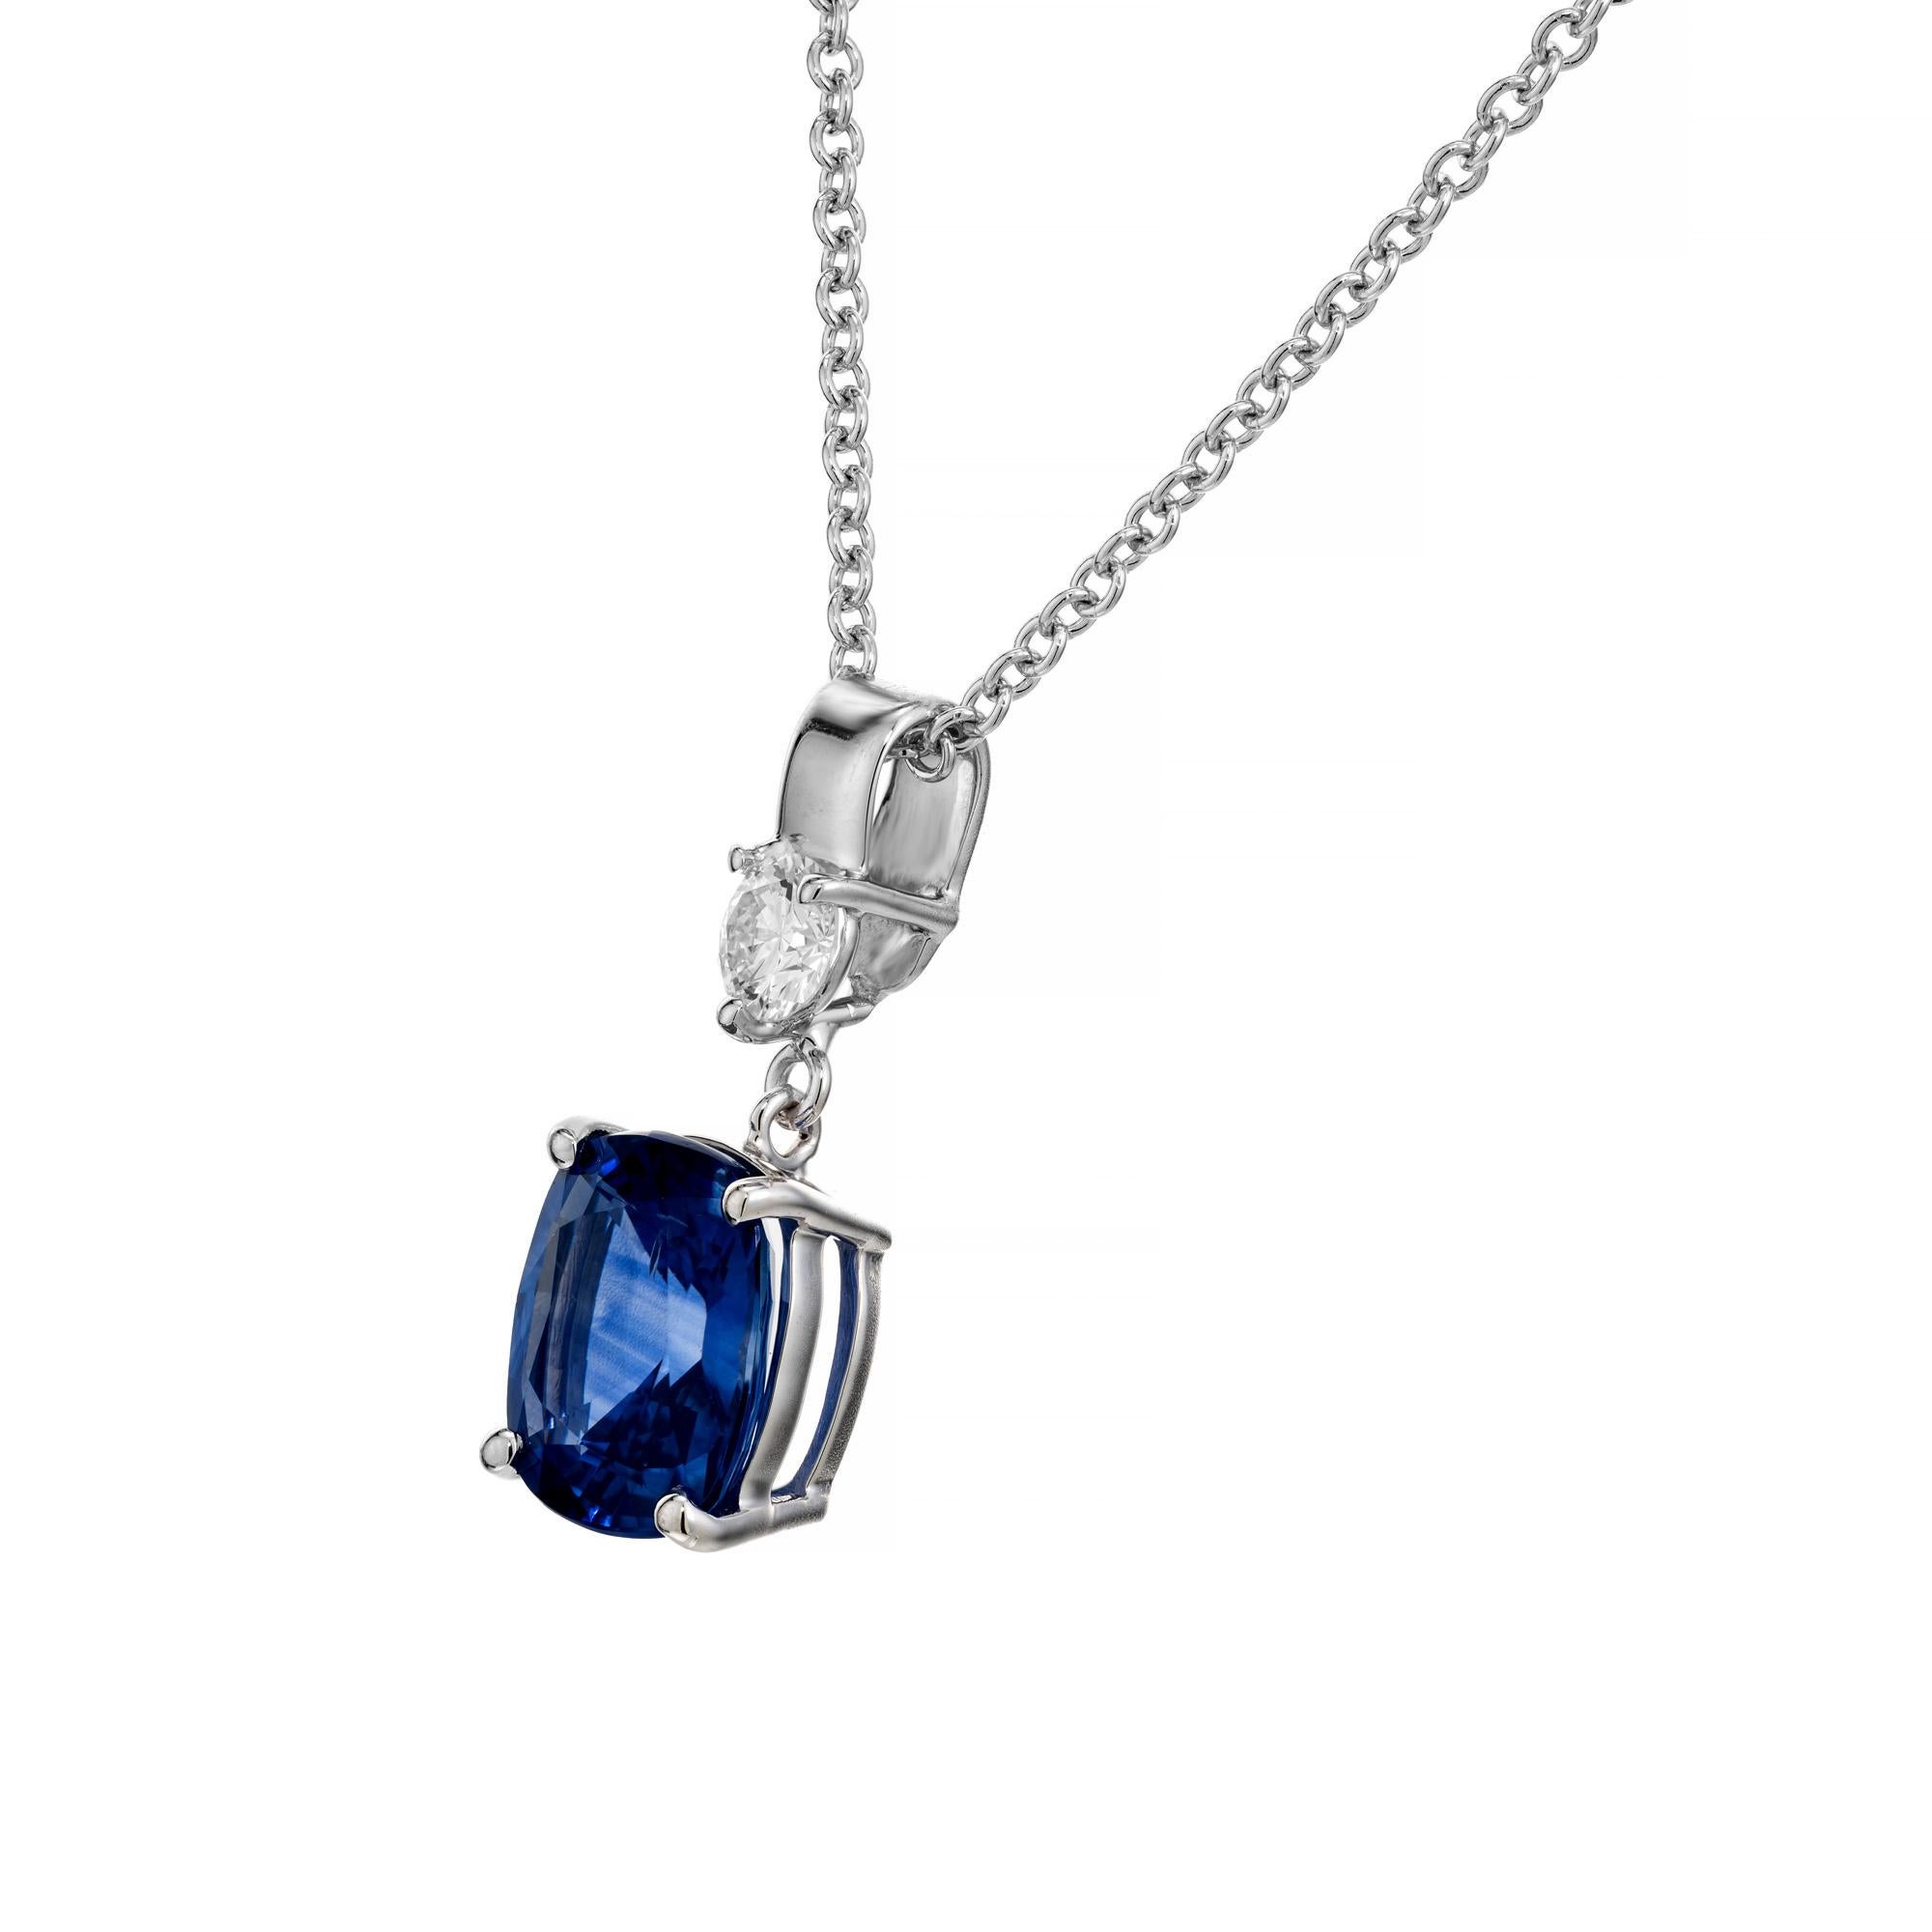 Cushion Cut Peter Suchy GIA Certified 1.95 Carat Sapphire Diamond Pendant Necklace  For Sale